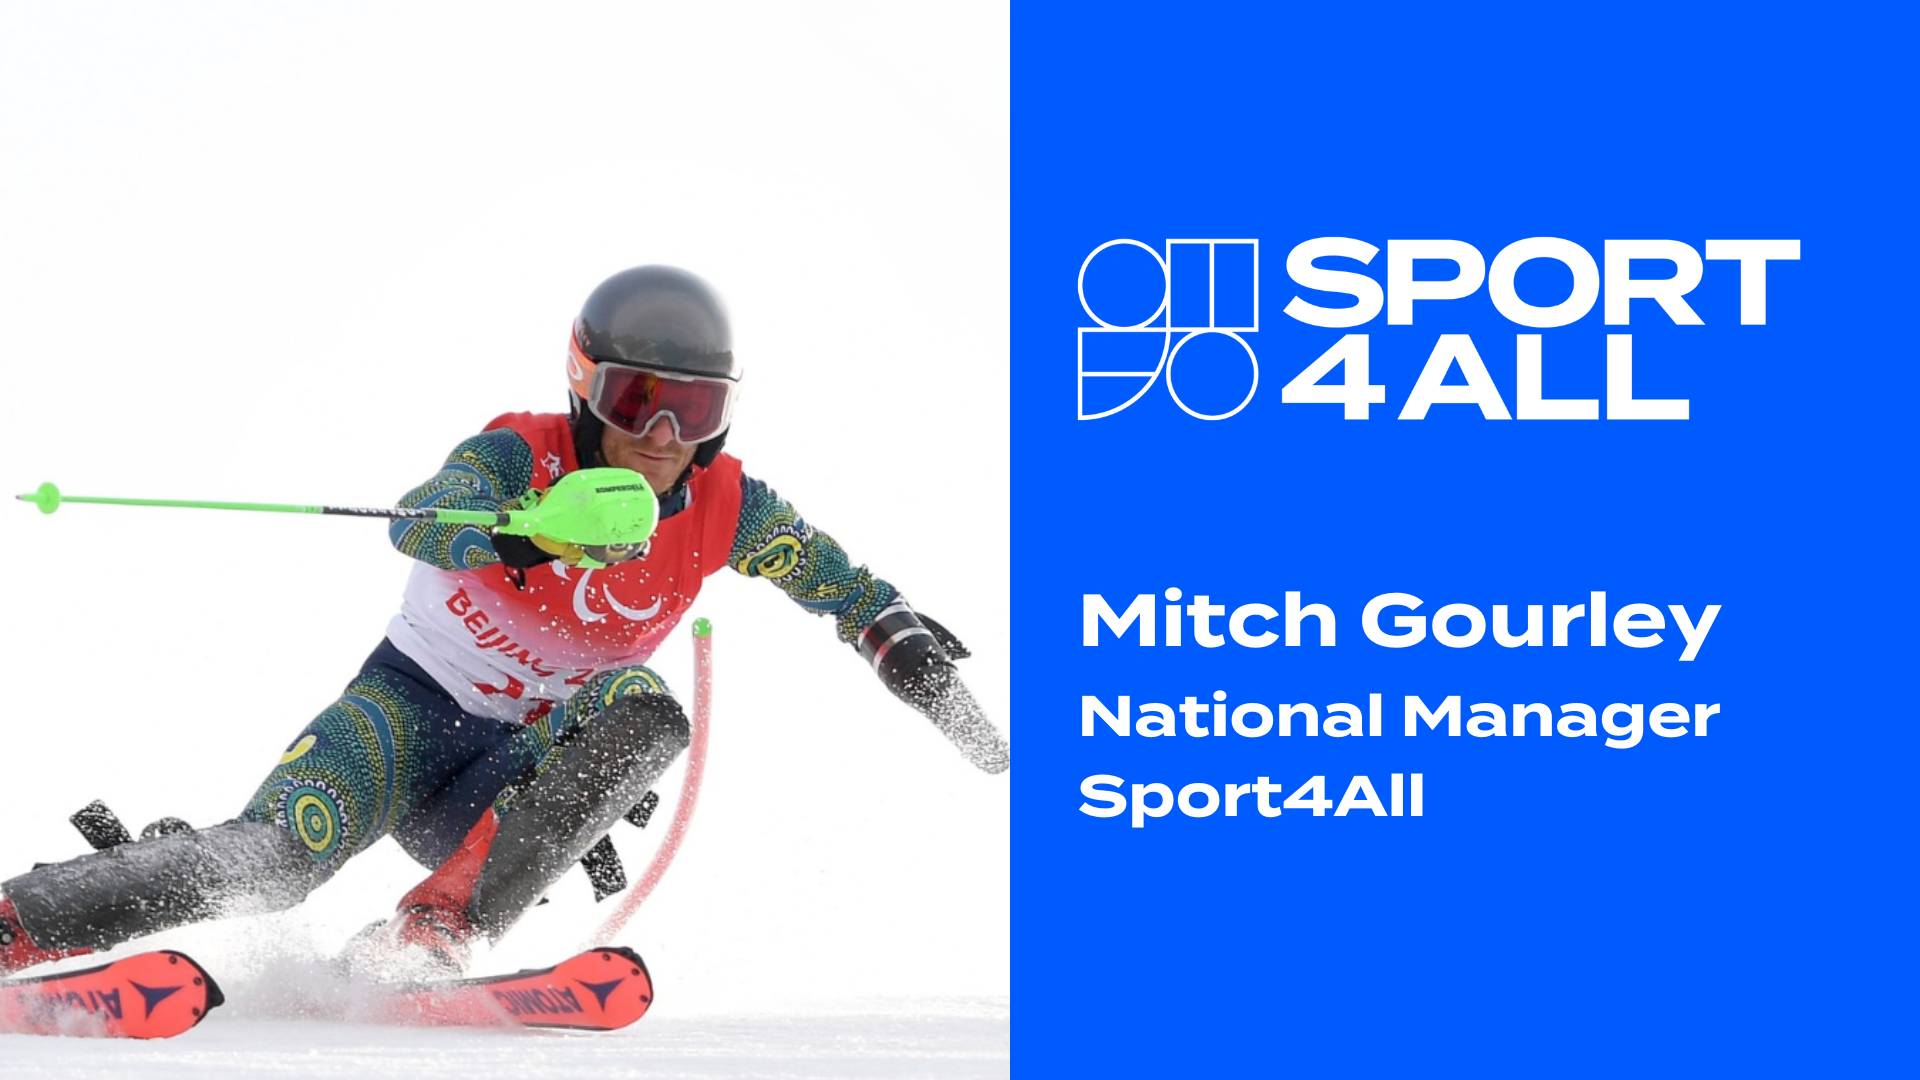 An alpine skier in action, wearing Australian national team gear, is captured as he is about to make a turn in the snow. Next to it, the Sport4All logo is shown along with the text, "Mitch Gourley. National Manager - Sport4All."